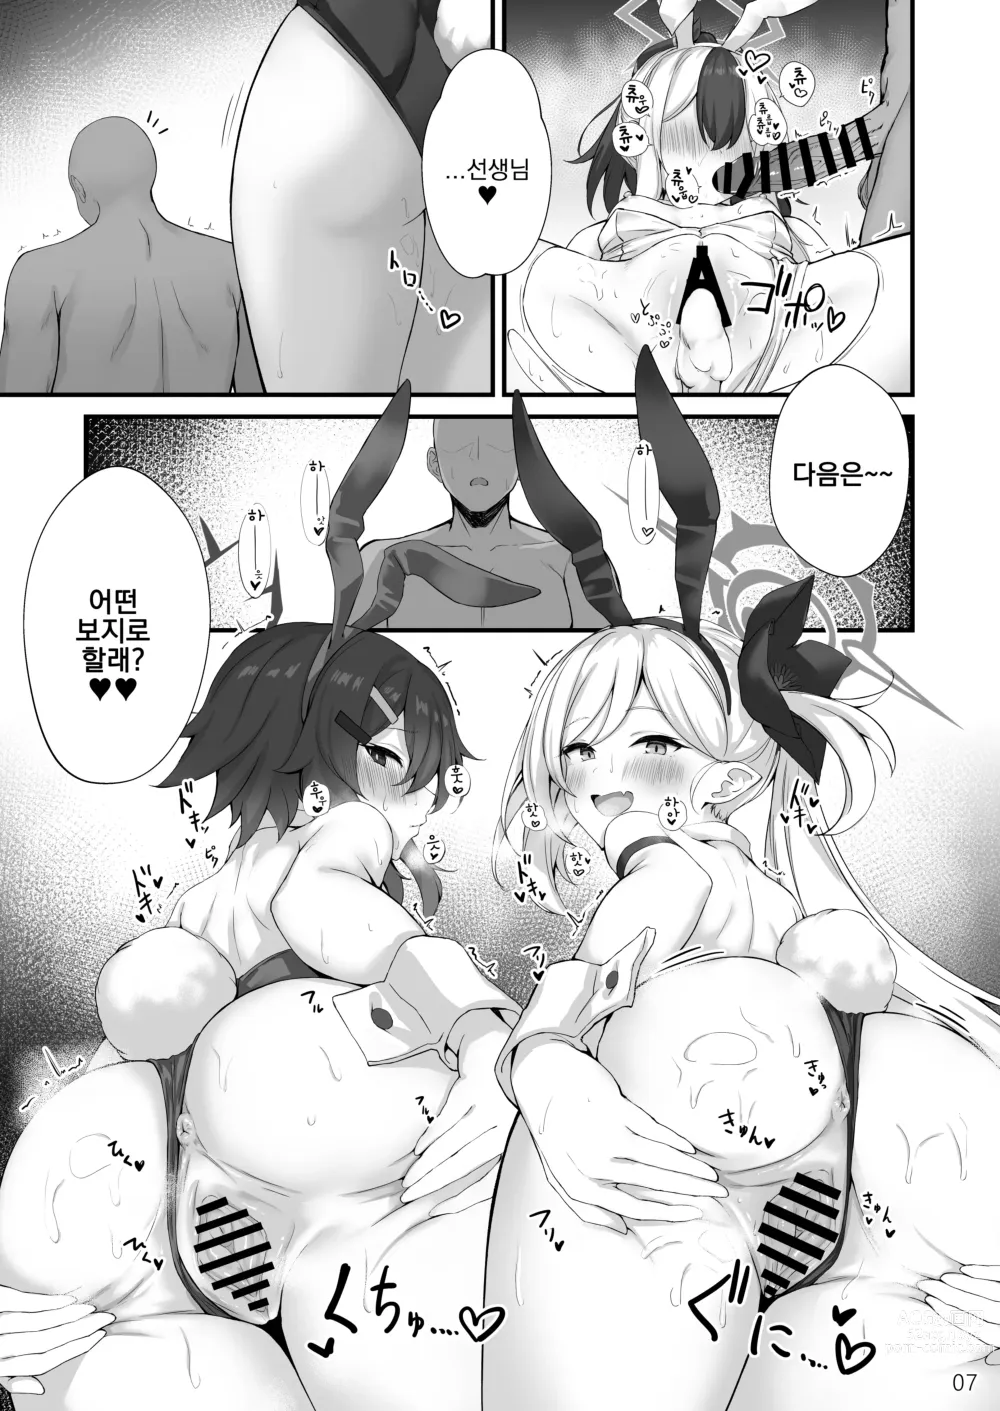 Page 8 of doujinshi 뷰르릇 아카이브 #3